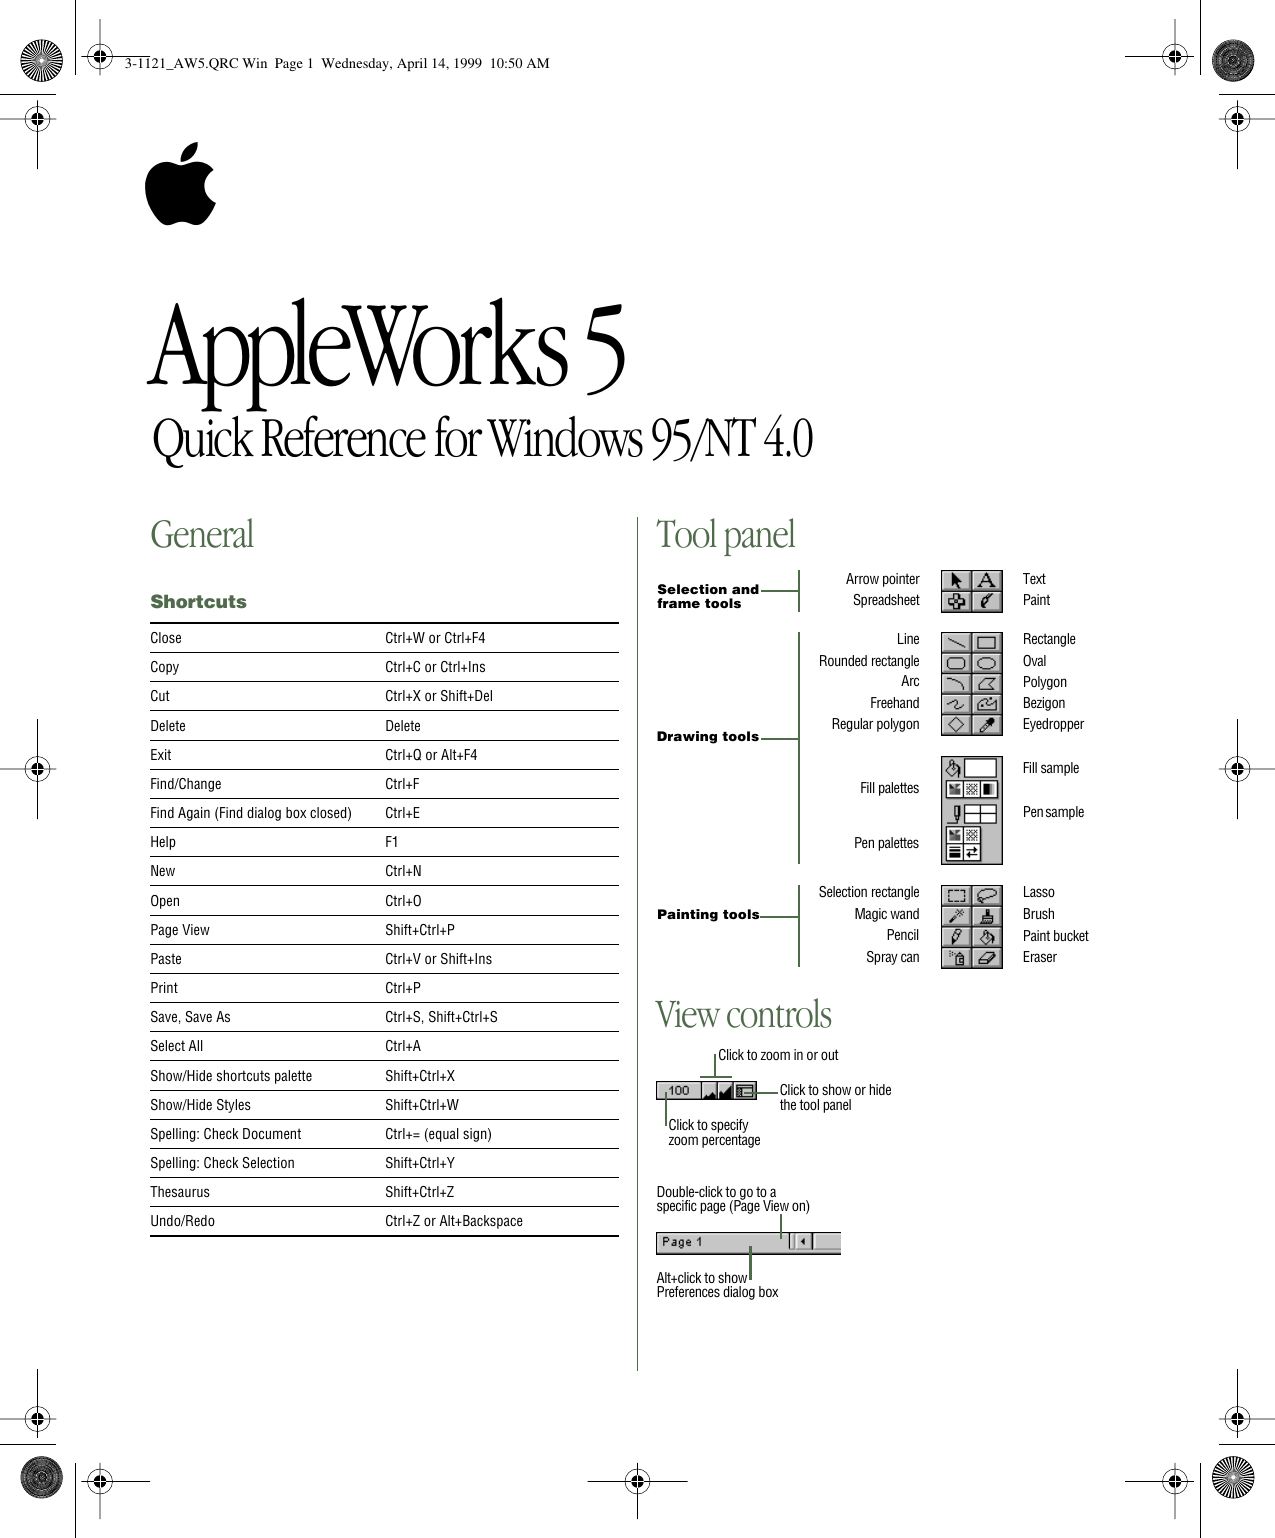 Page 1 of 4 - Apple AppleWorks 5 Quick Reference Works - Windows 95 NT 4.0 Appleworks5WIN Ref